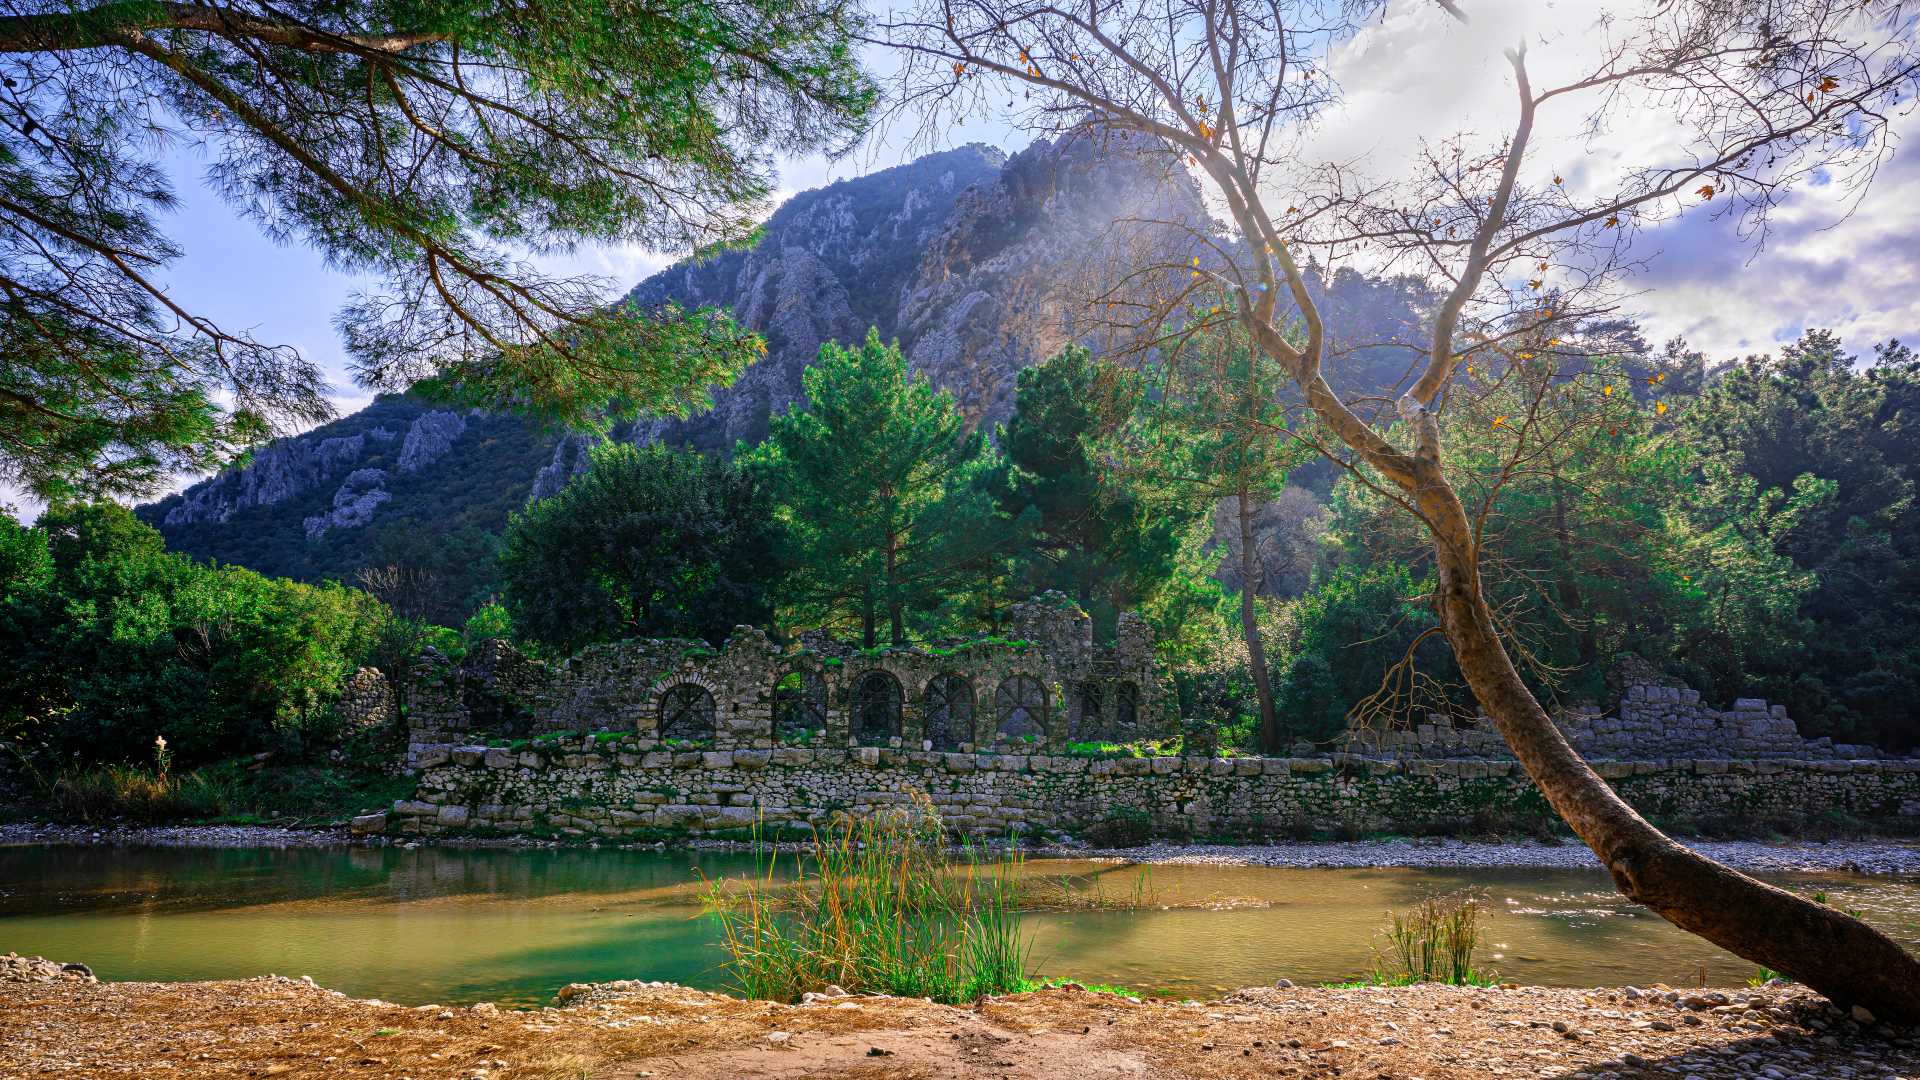 Olympos Ancient City